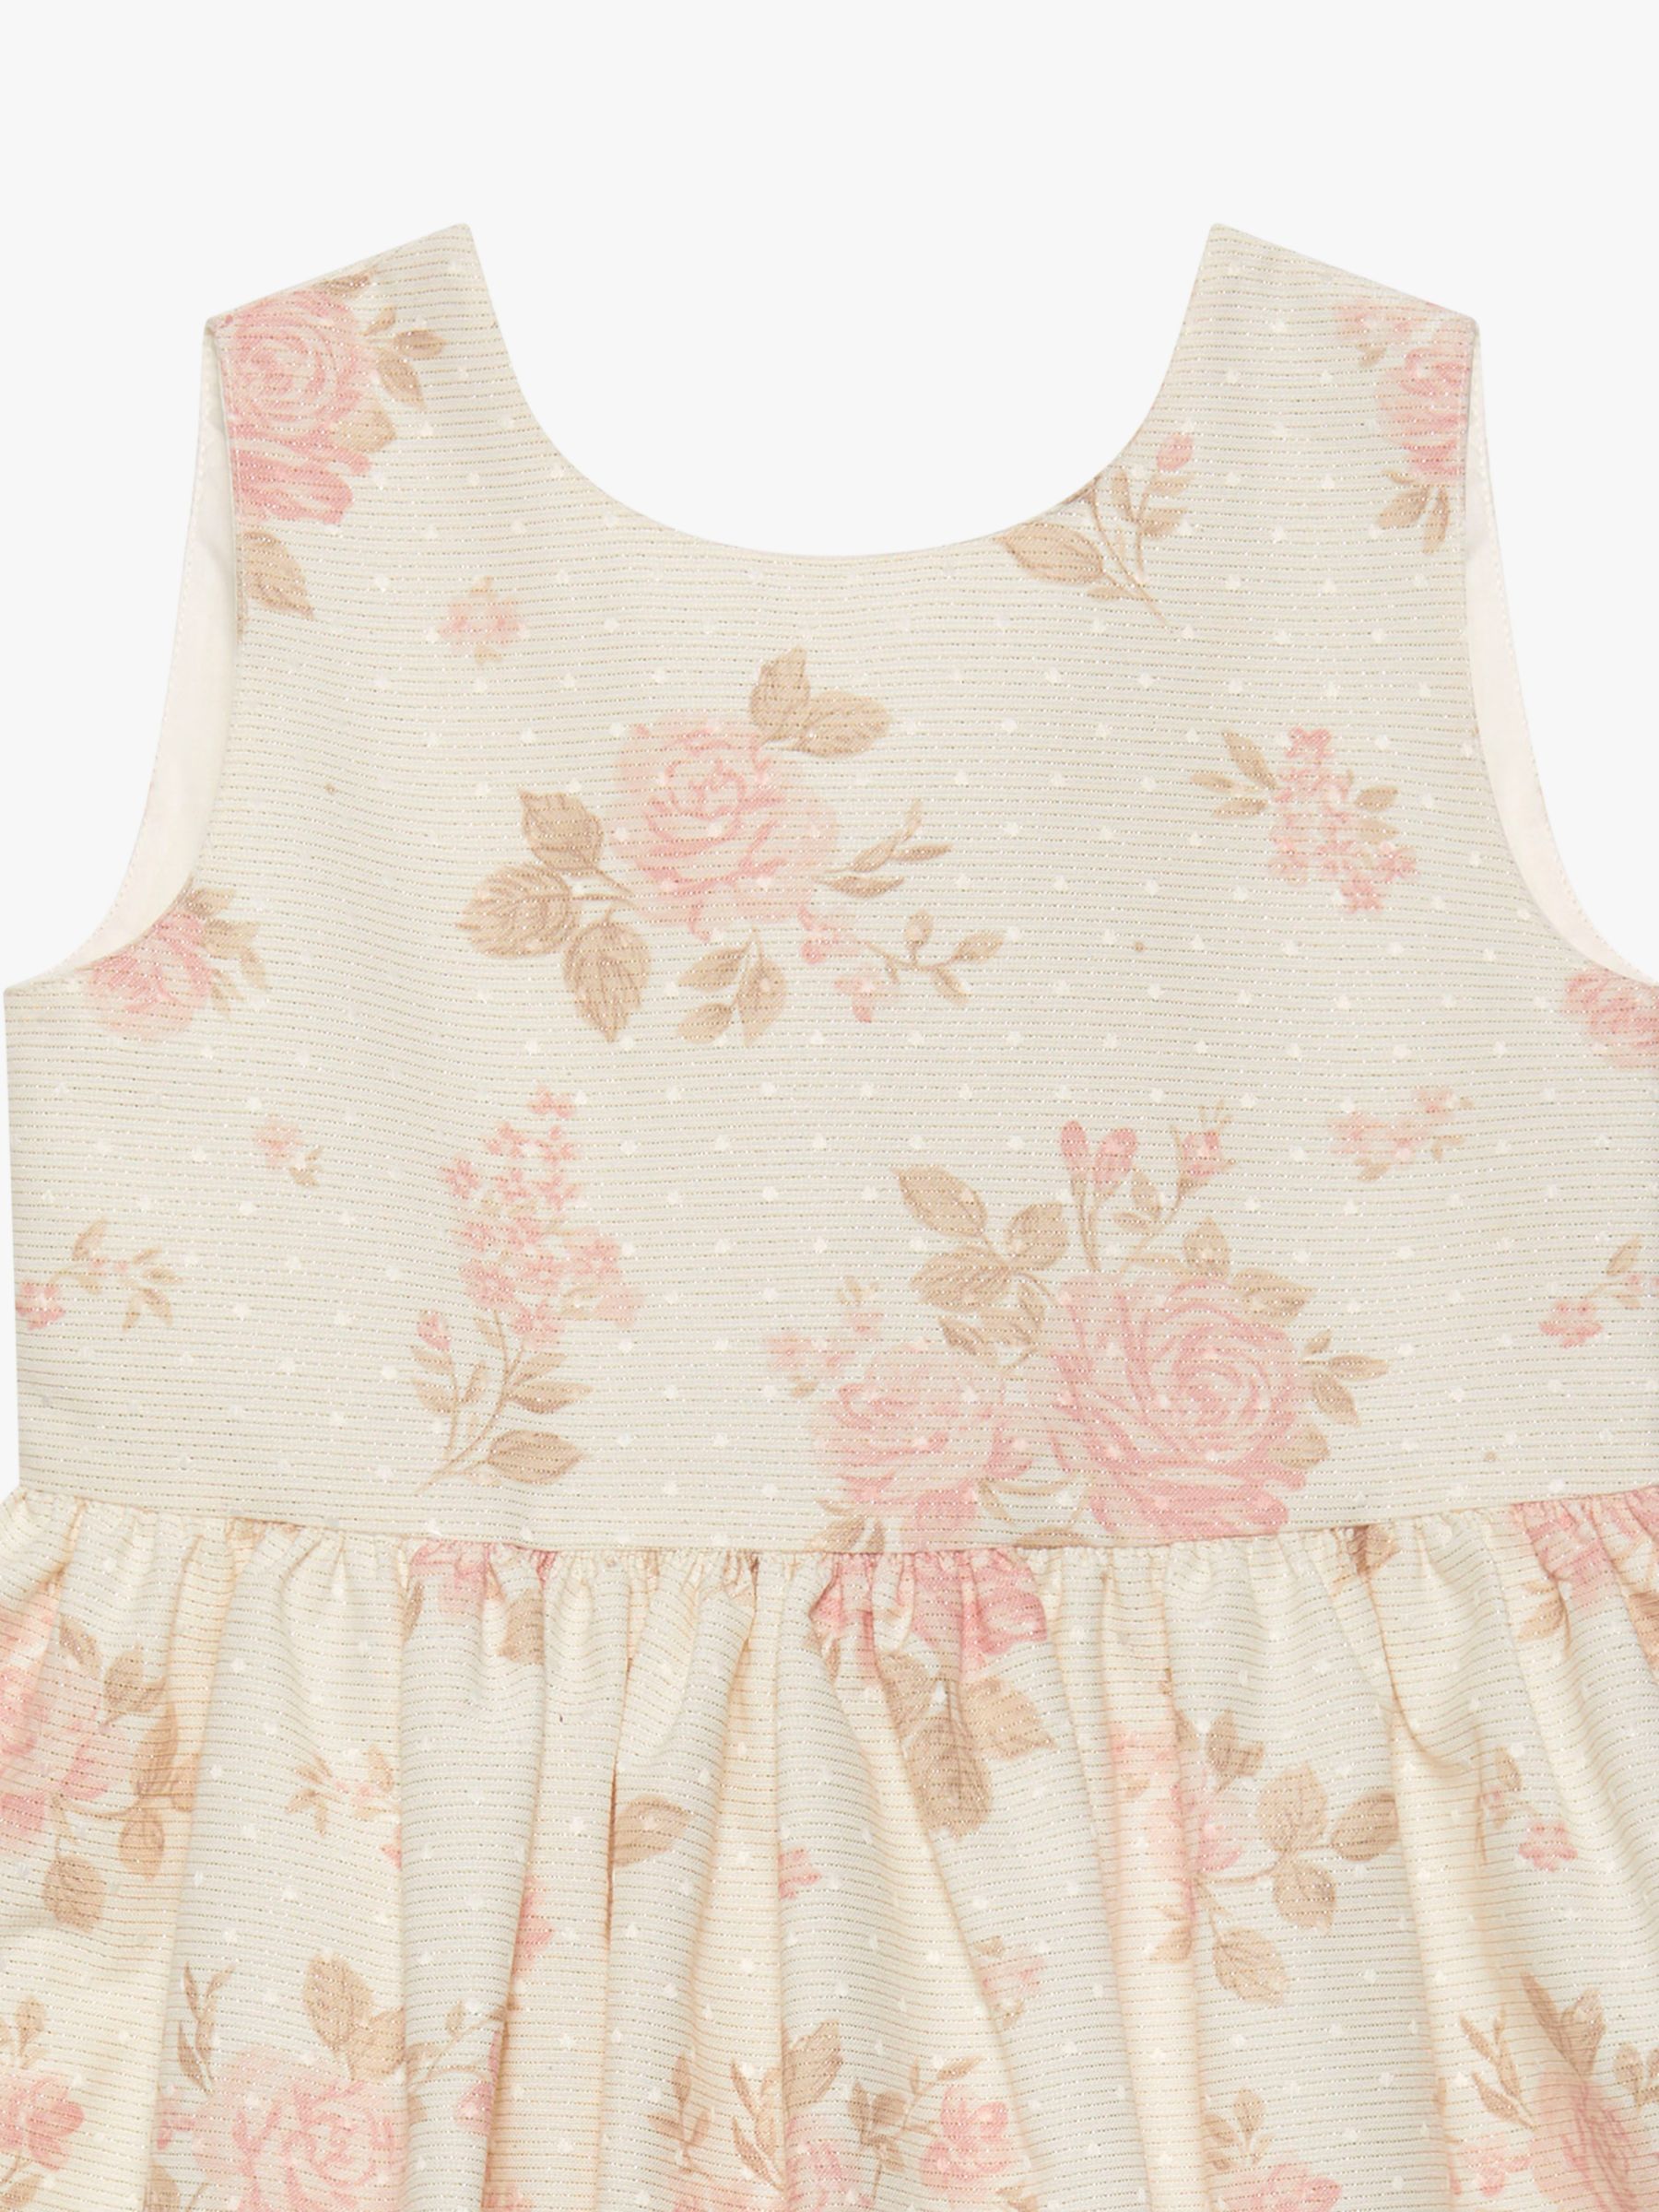 Buy Trotters Kids' Maeva Floral Print Luxe Party Dress, Gold Online at johnlewis.com